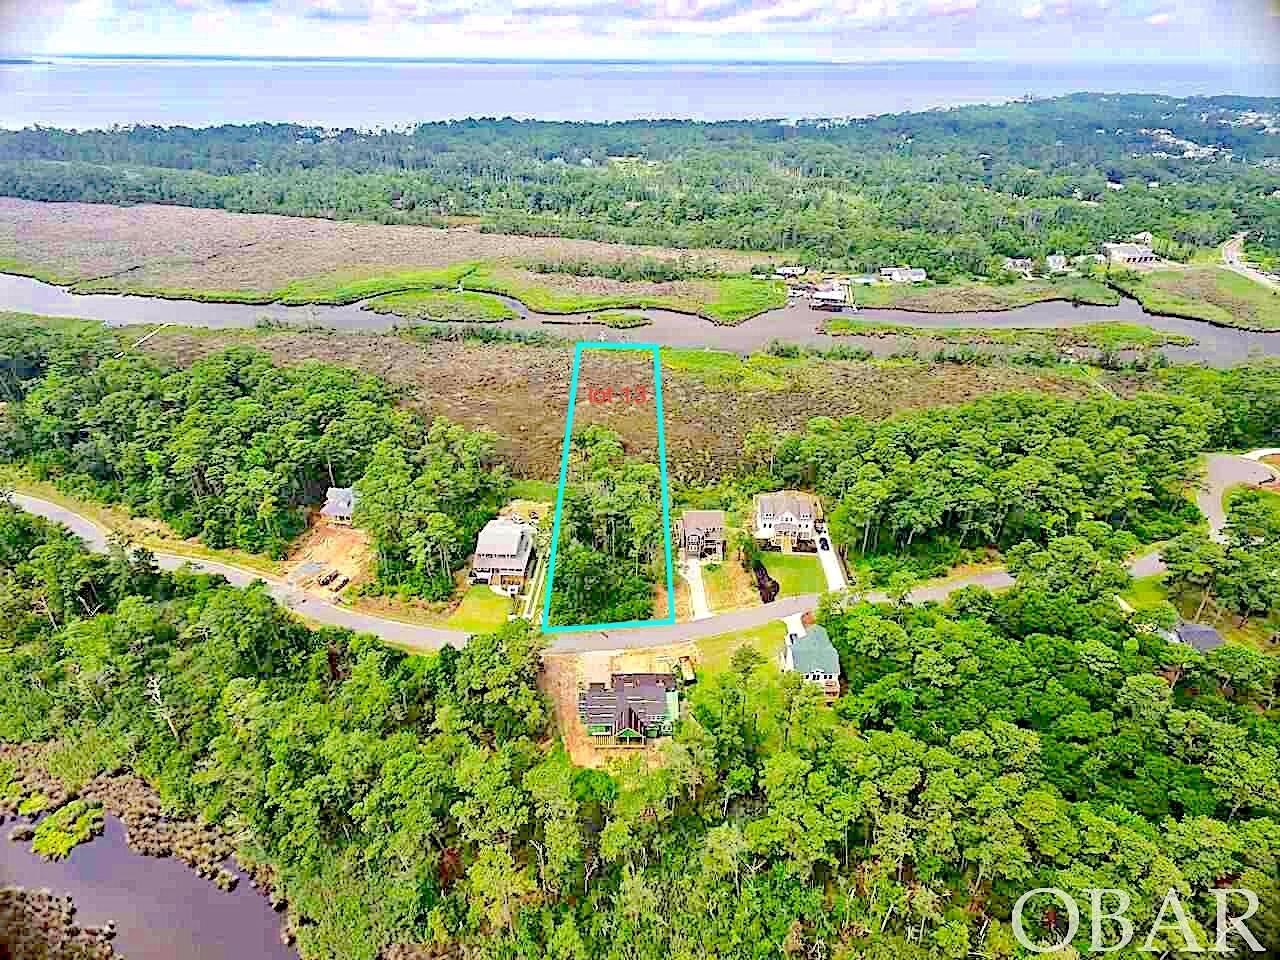 Rare Spacious acreage with deep water access in Kill devil Hills Sunrise Crossing! Soundview / Deep Water Canalfront Harborview lot.  Private waterfront homesite w/ private dock potential located in newly developed Kill Devil Hills -OBX soundfront community.  Beautiful Sound, Harbor, and Marsh views with deep water canal frontage for private dock and direct sound/ocean access.  Largest waterfront lowest price per sqft/waterfront acreage!  Build your dream home on the waterfront, 2nd home or vacation investment property.  Utilities are run thru community already and path to private dock waterfront access located by sign in front of lot. Great backside view from community dock on right as you enter community.  Centrally located between Nags Head and Kitty Hawk, close to the Sound/Ocean access, Oregon inlet, Sound, Beach, Marinas, Restaurants, and all the Outer Banks NC has to offer!